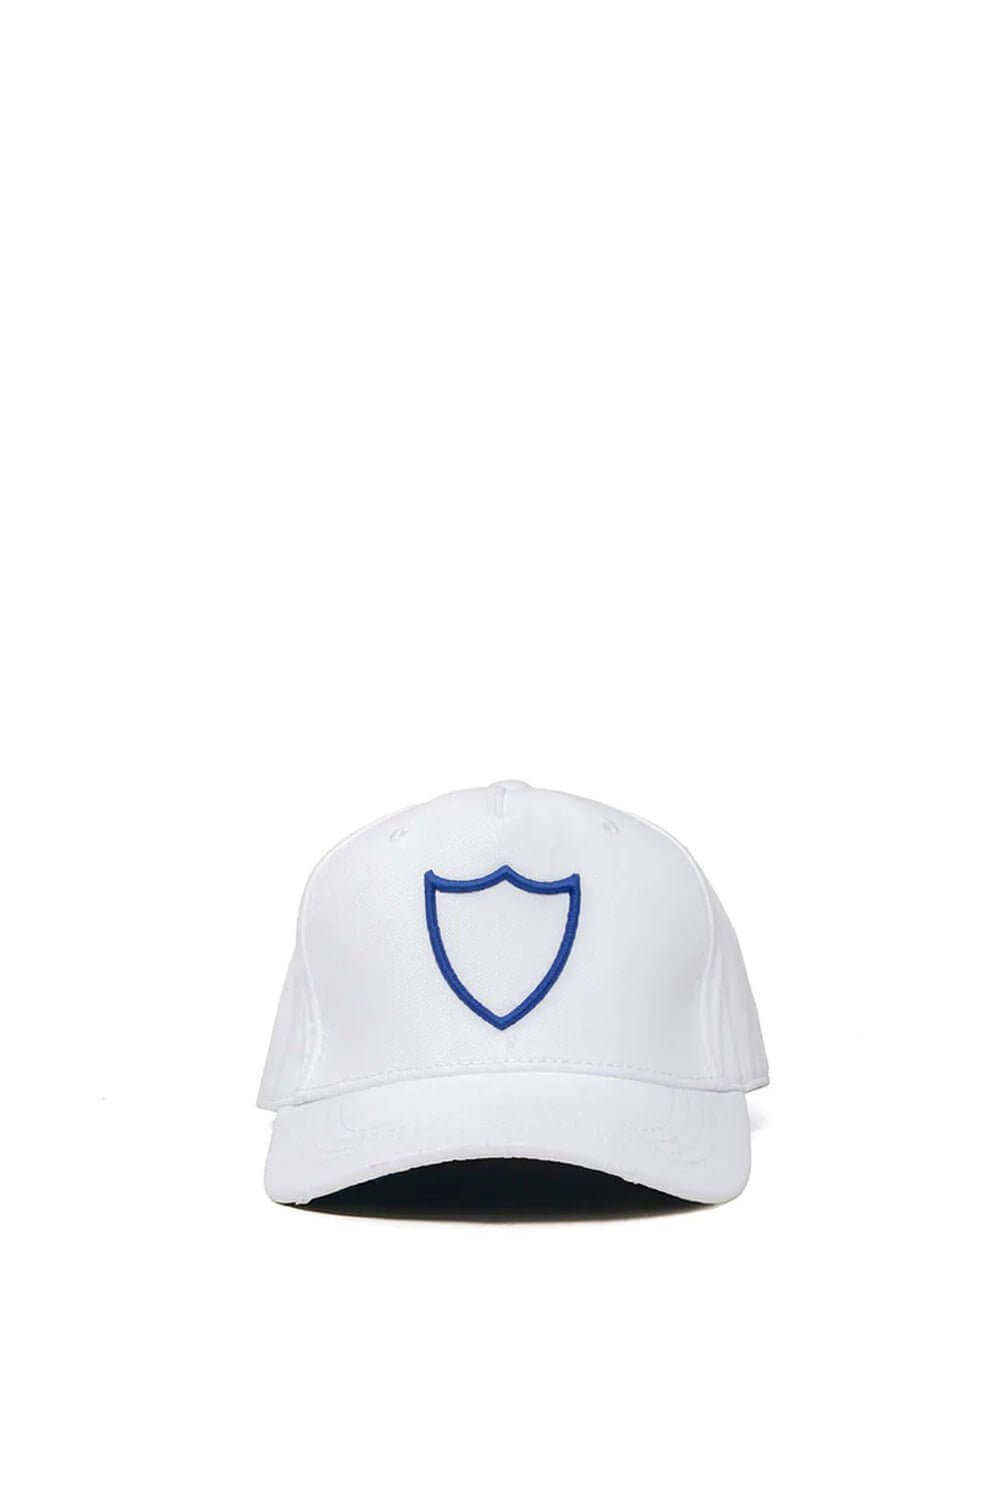 HTC LOGO BASEBALL CAP White baseball cap with preformed peak, round crown with eyelets, HTC Los Angeles shield logo embroidered on the front, adjustable strap on the back. One size fits all. 100% cotton. HTC LOS ANGELES